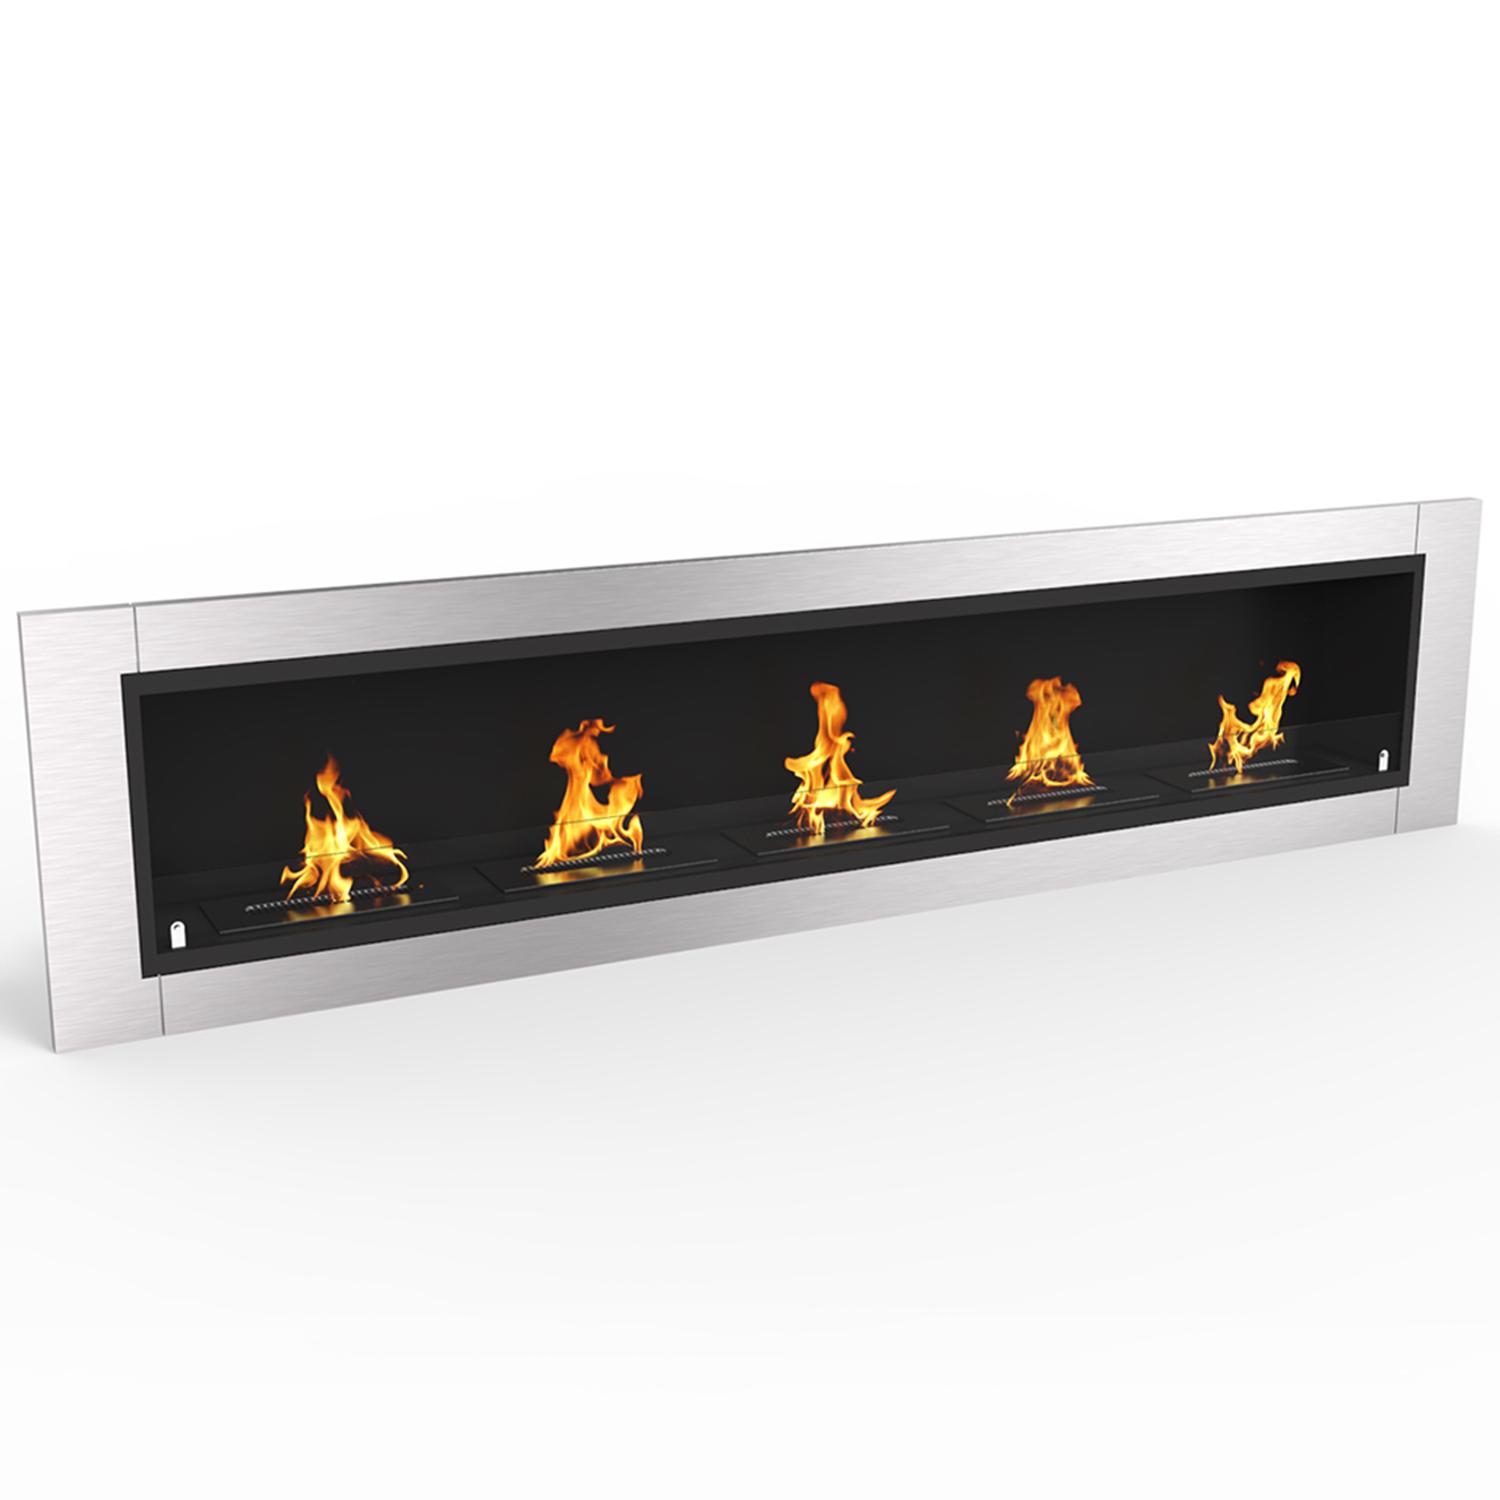 Regal Flame Cambridge 71 Ventless Built In Wall Recessed Bio Ethanol Wall Mounted Fireplace Similar Electric Fireplaces, Gas Logs, Fireplace Inserts, Log Sets, Gas Fireplaces, Space Heaters, Propane